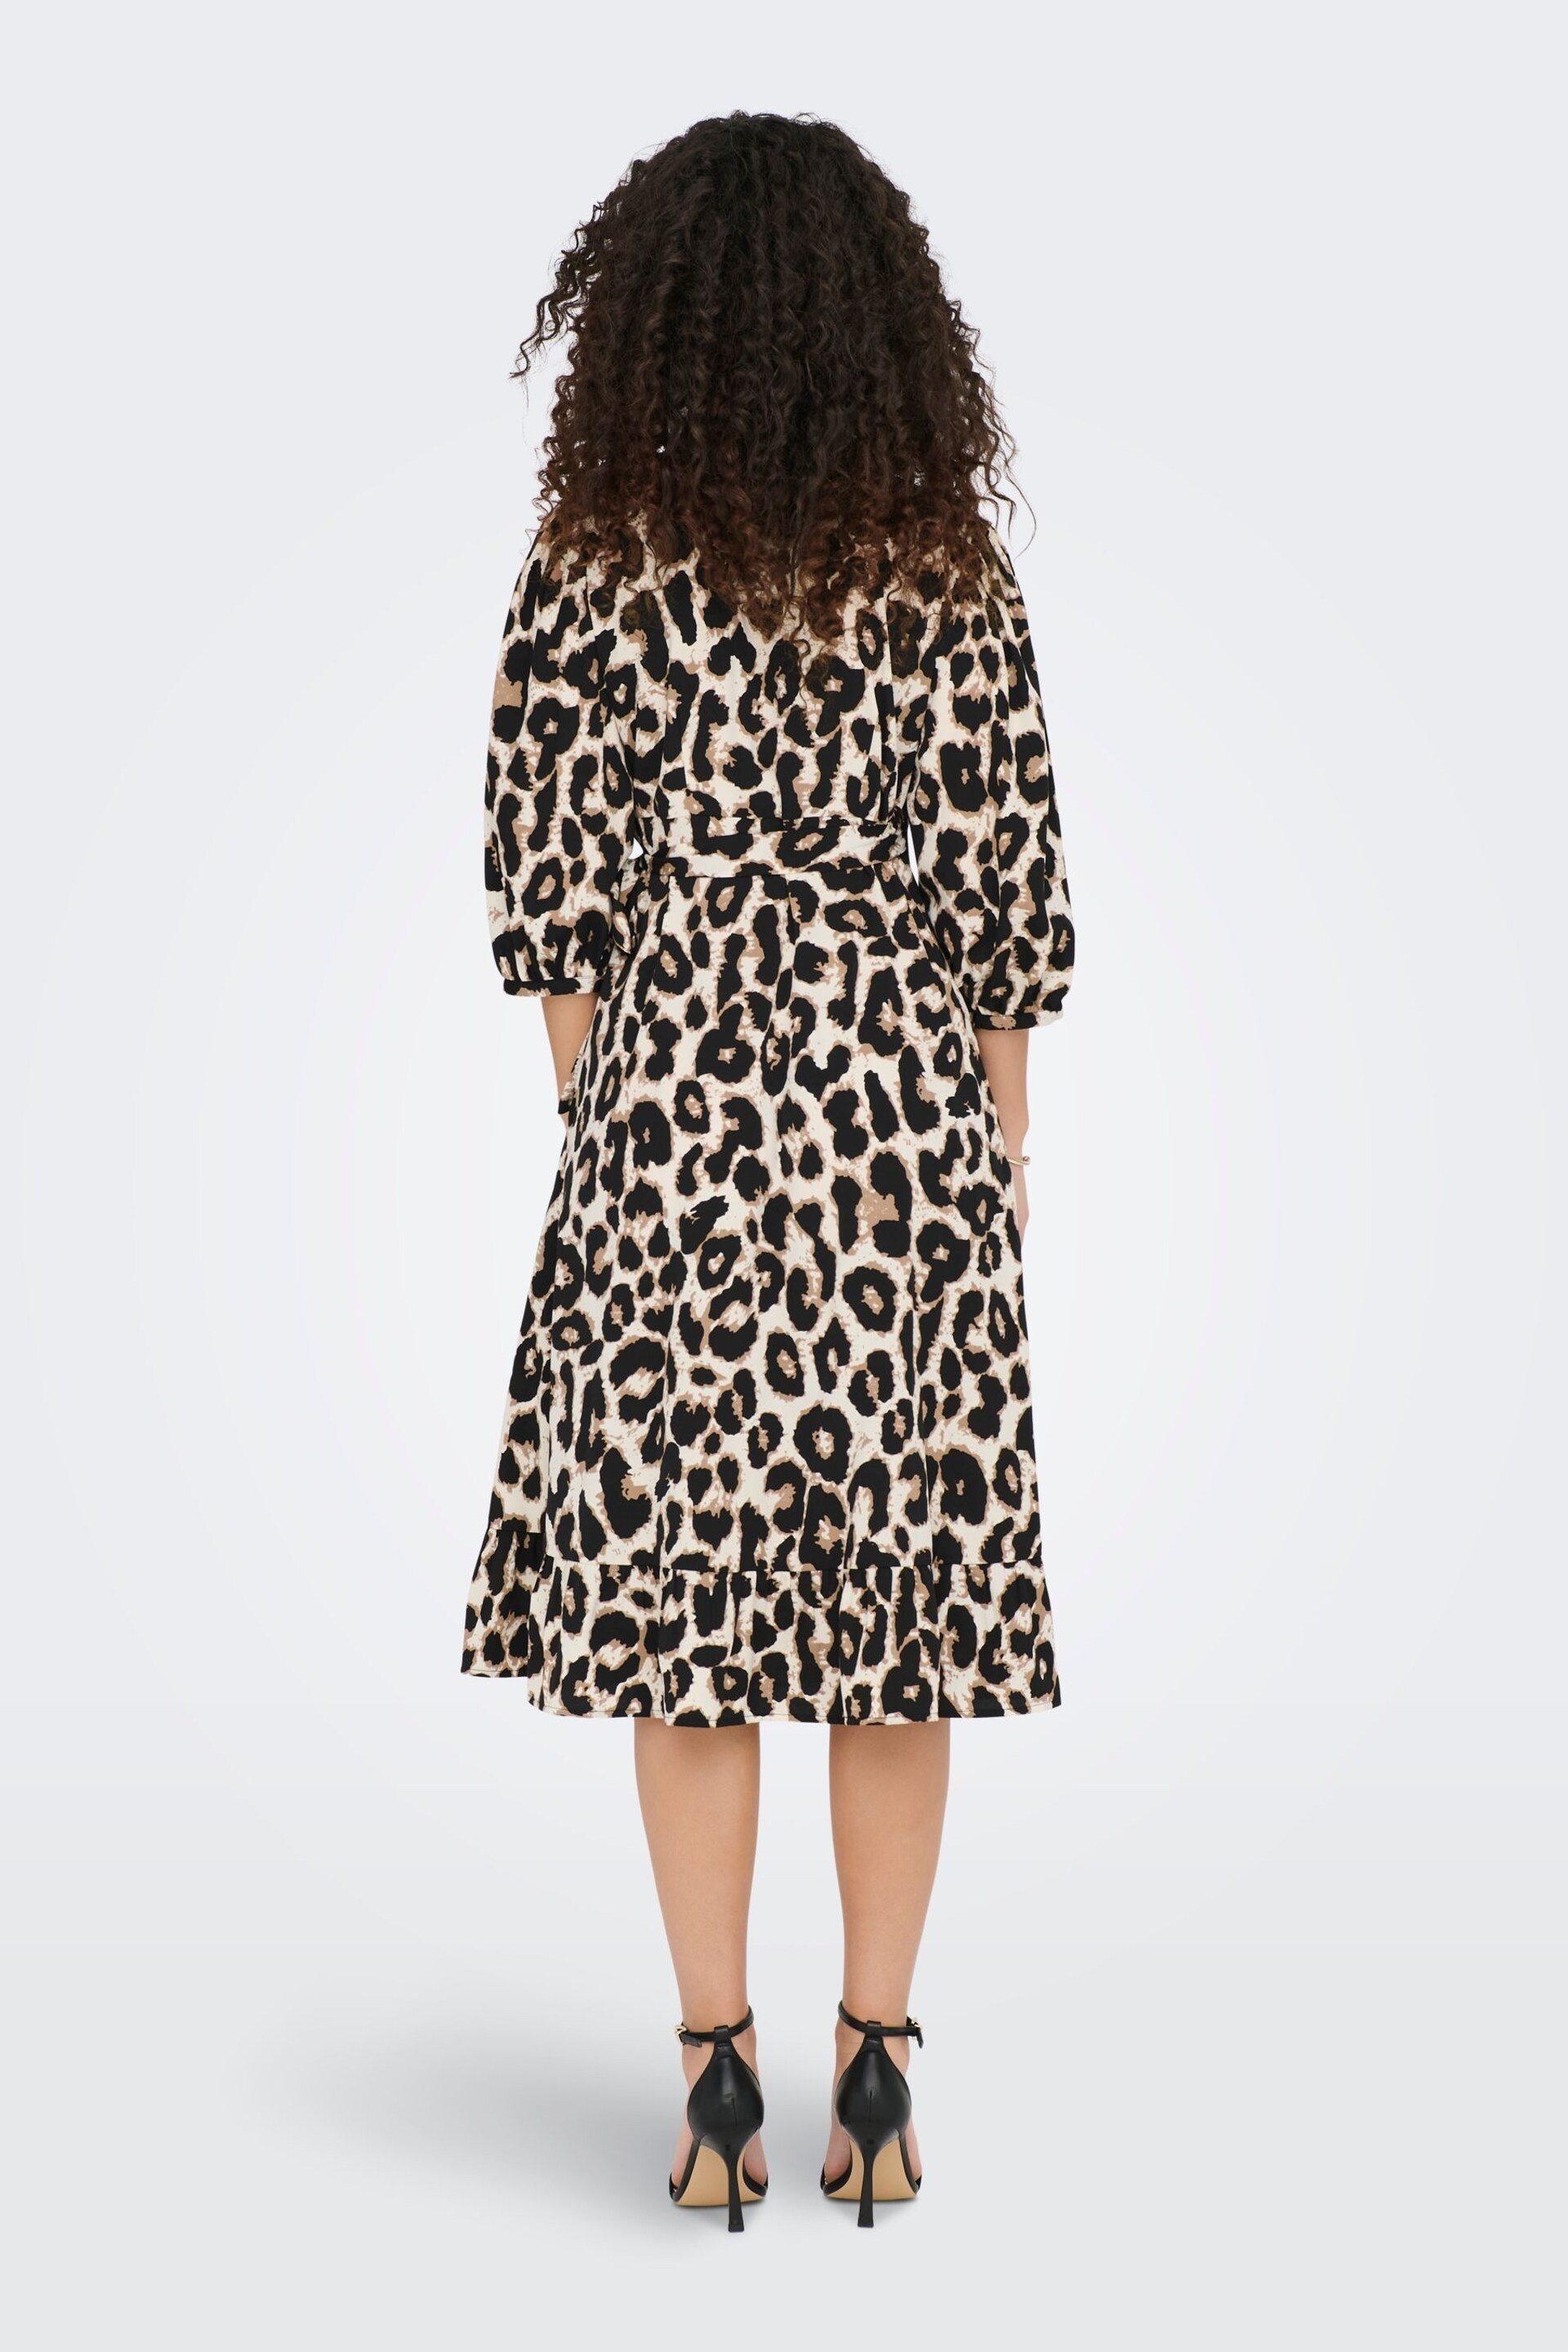 ONLY Leopard Print Long Sleeve Wrap Midi Dress - Image 3 of 5